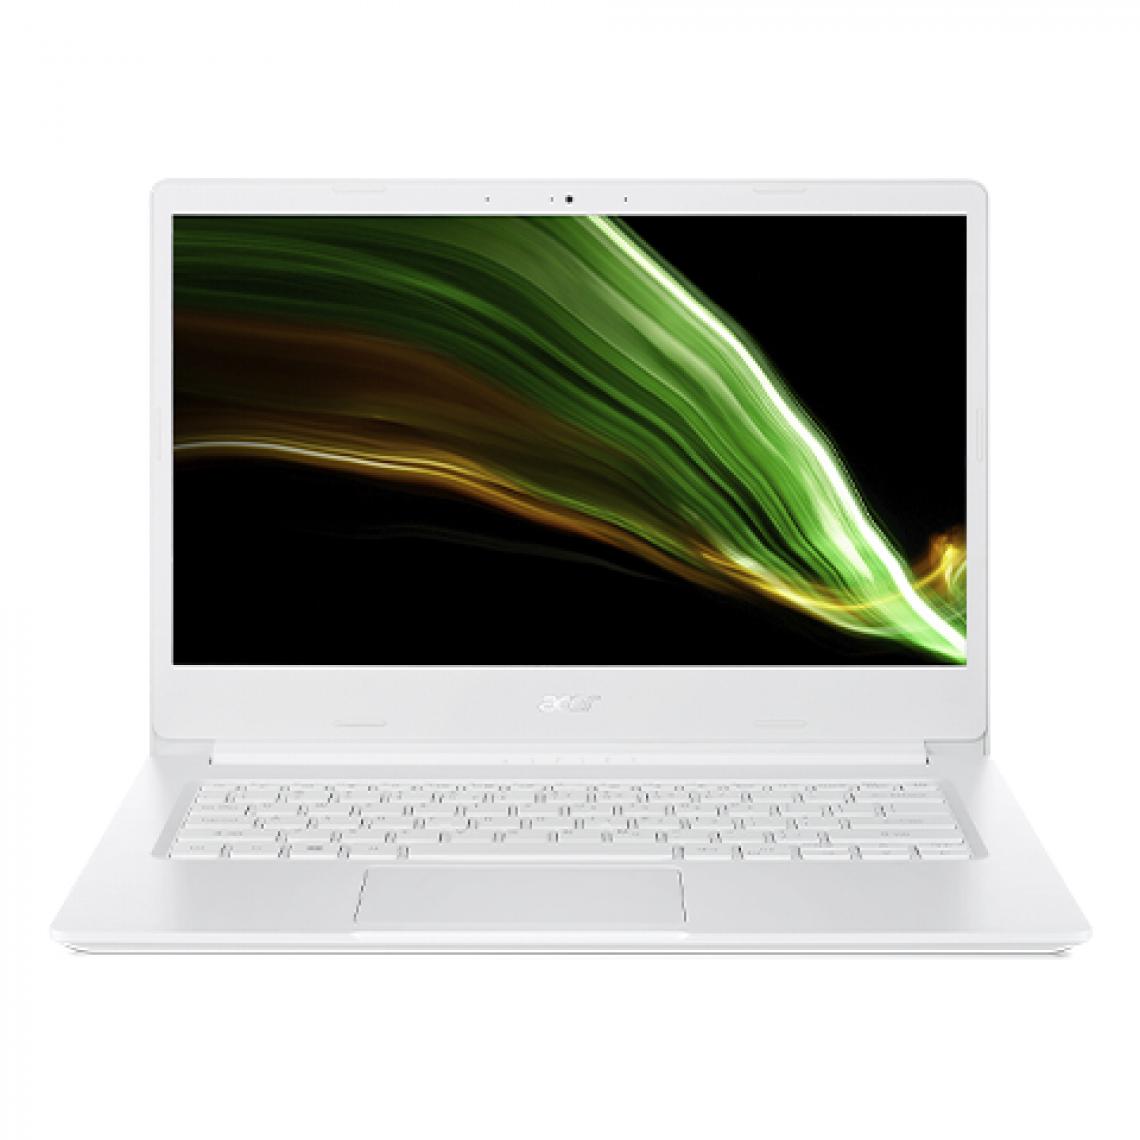 Acer - Aspire A114-61-S732 / 14.0'' HD (1366 x 768) - PC Portable